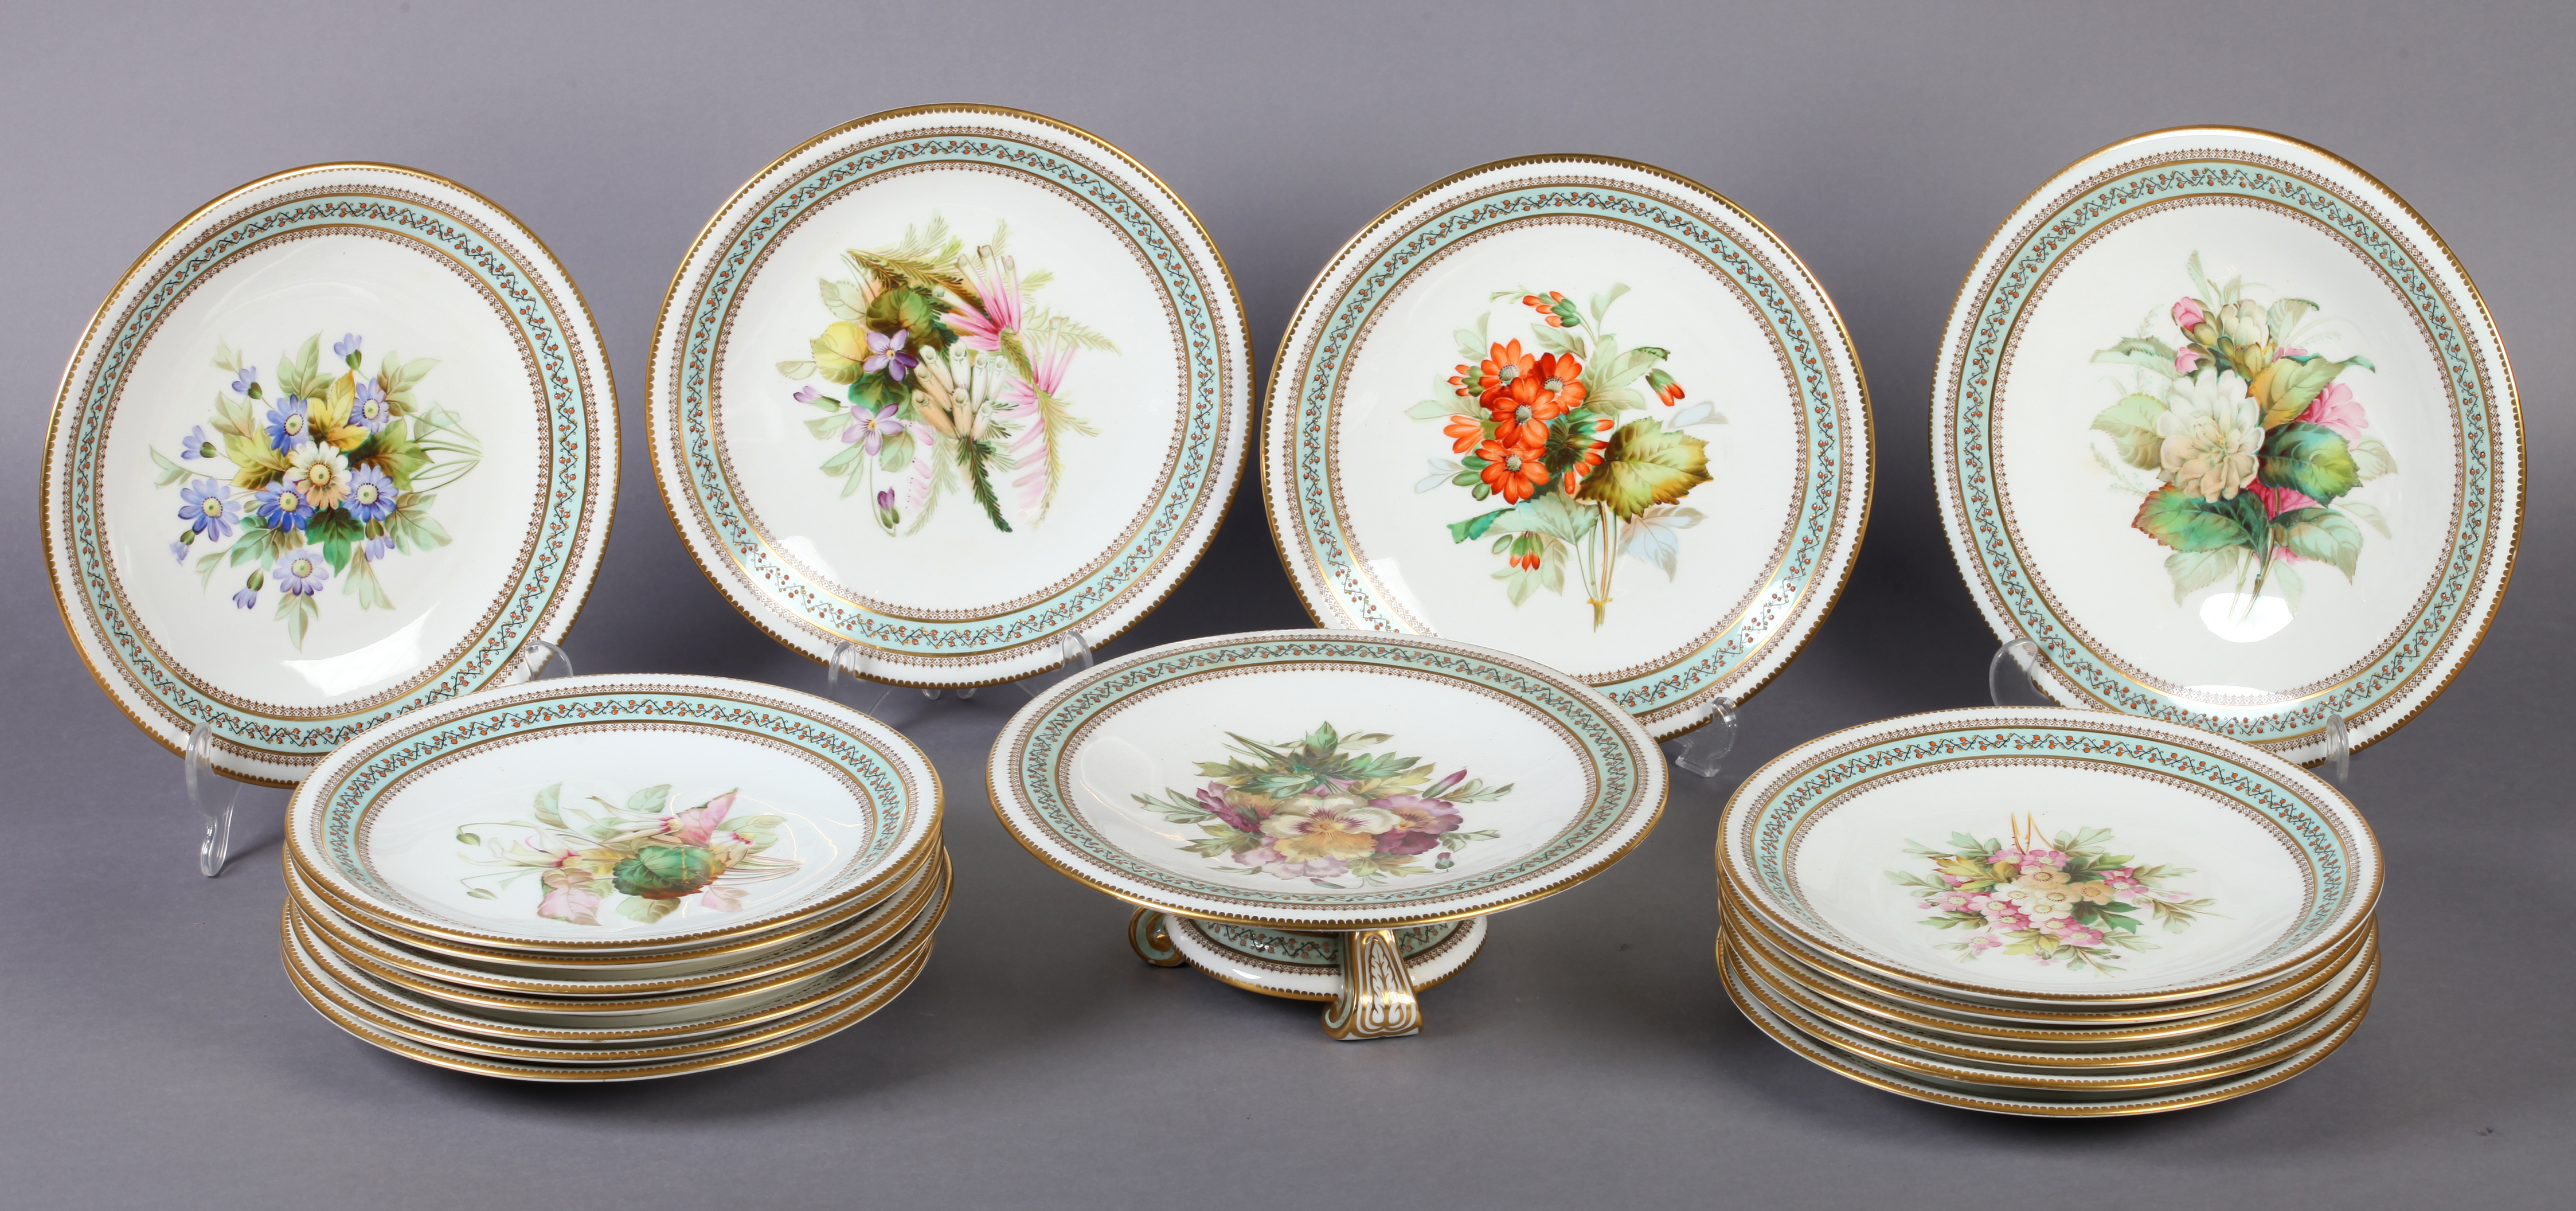 A ROYAL WORCESTER PART DESSERT SERVICE each piece hand painted with a botanical study of English